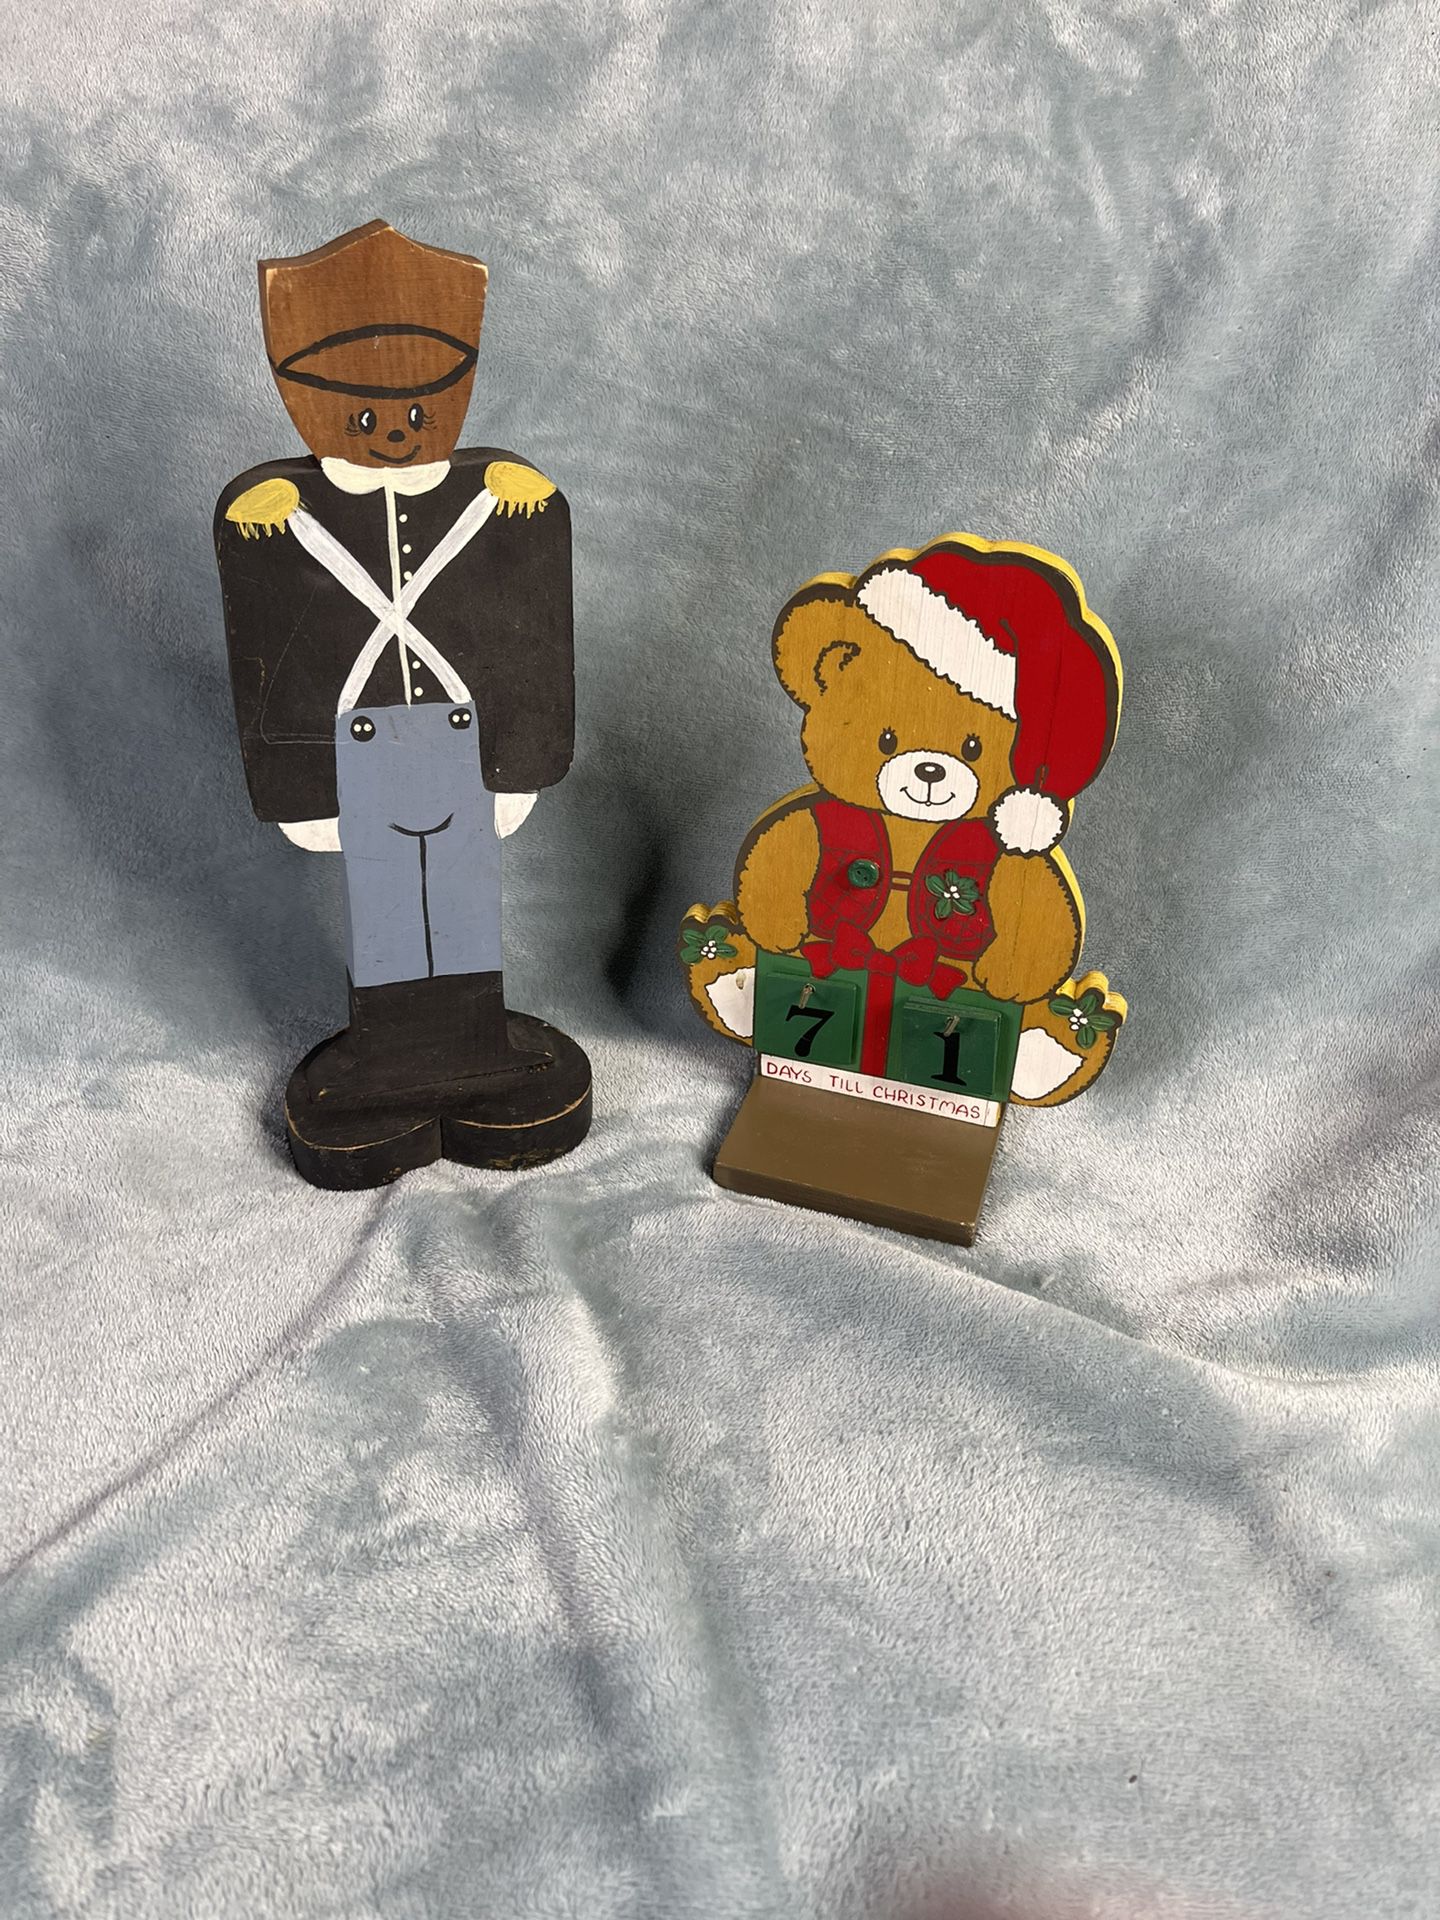 Christmas teddy bear and drummer boy wooden hand painted figurines